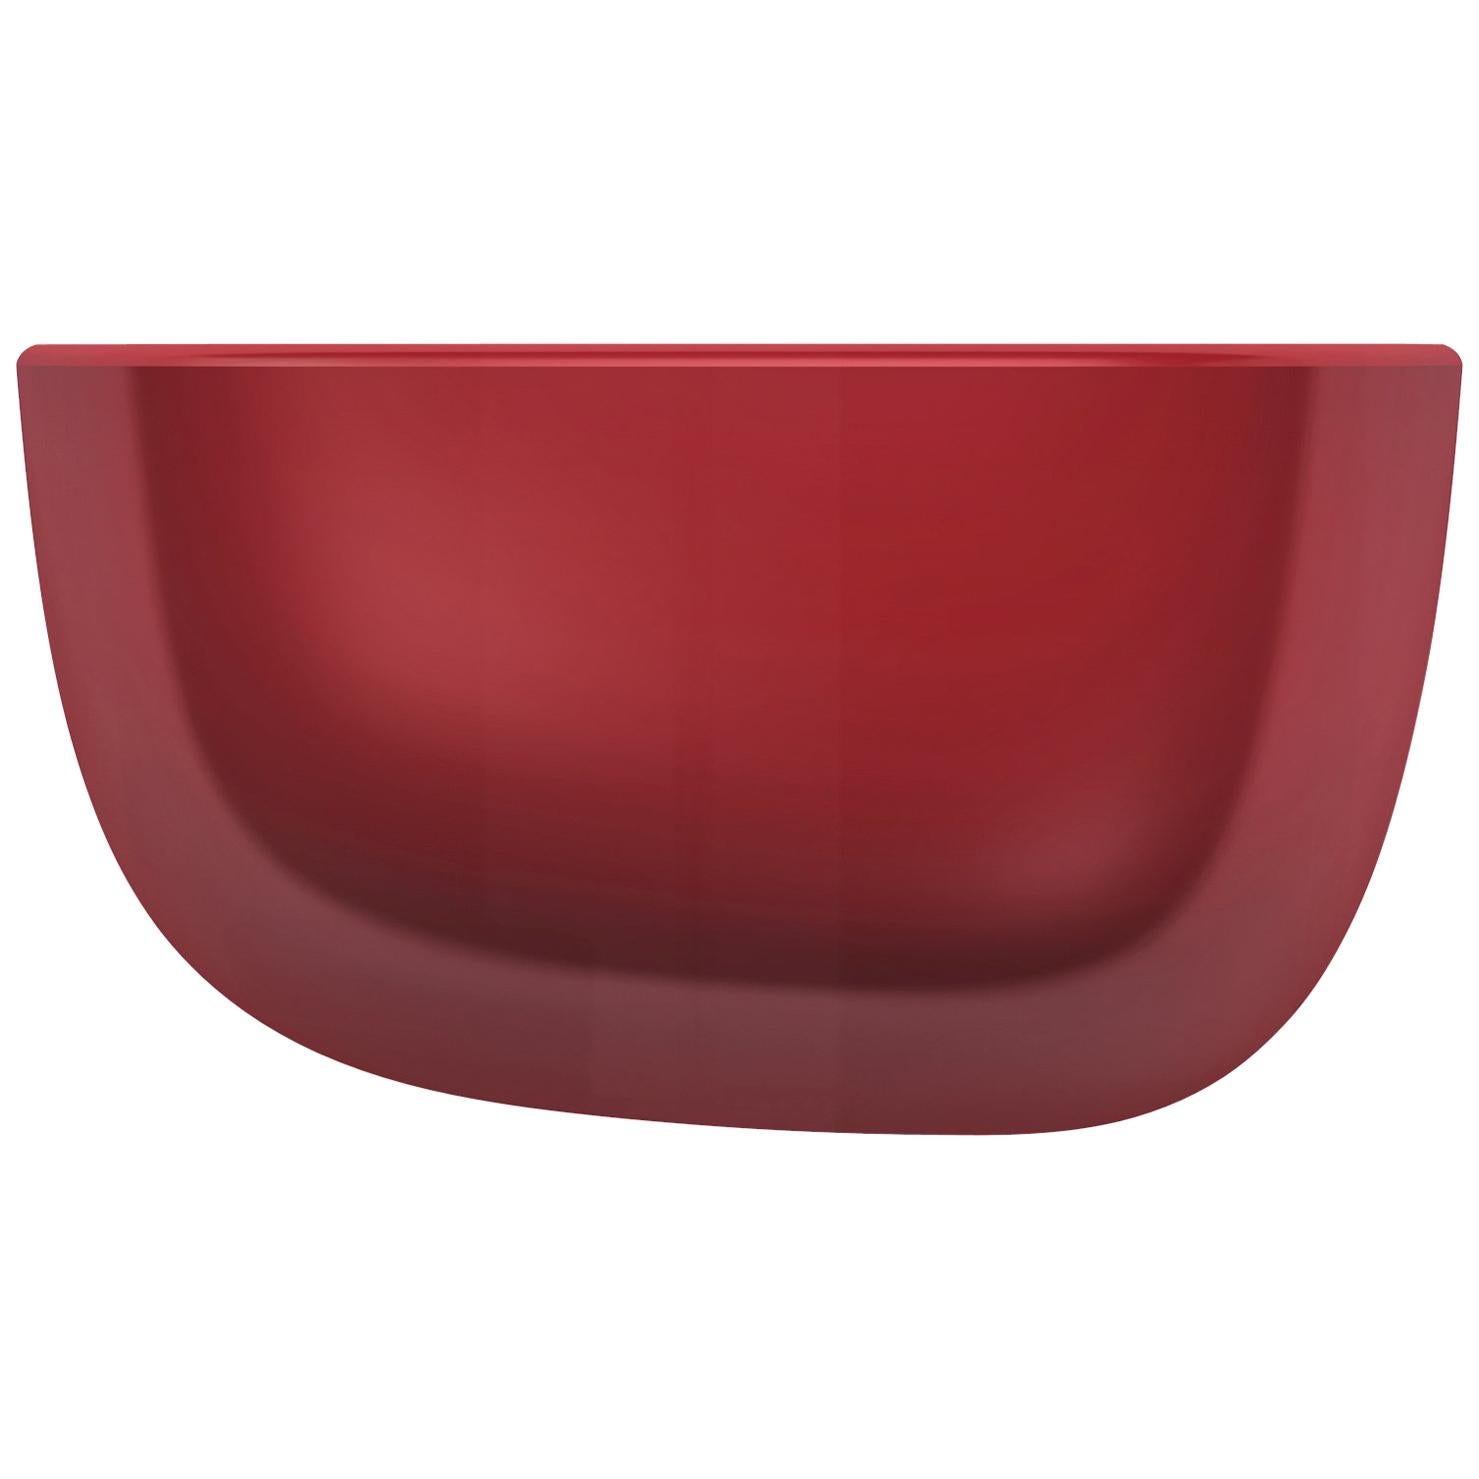 Vitra Small Corniches in Japanese Red by Ronan & Erwan Bouroullec For Sale